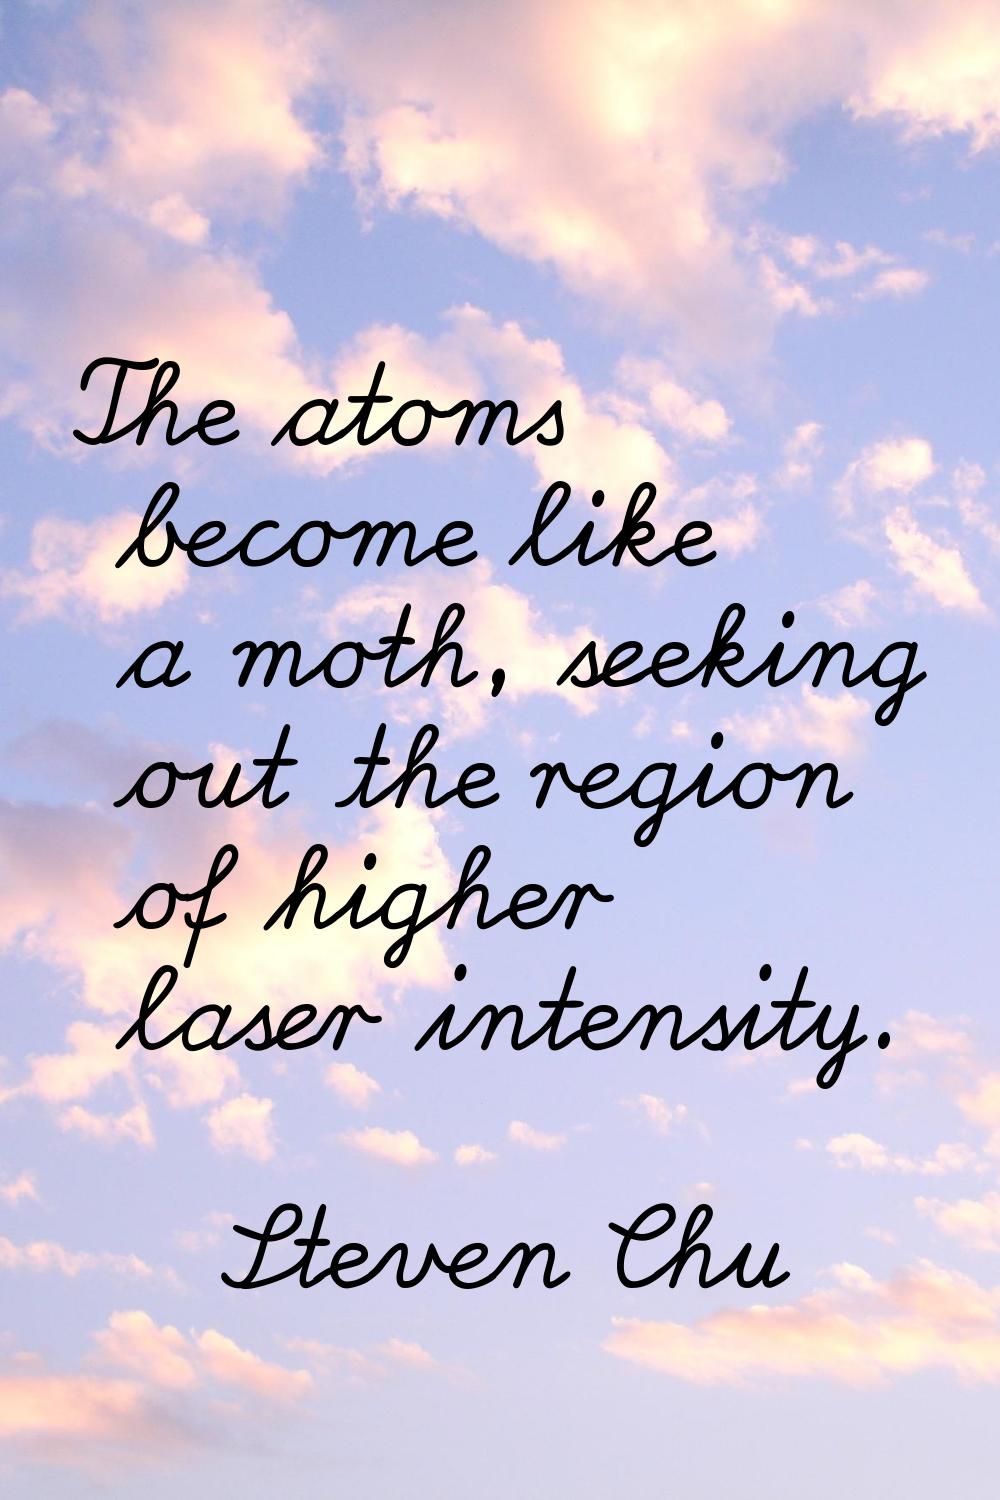 The atoms become like a moth, seeking out the region of higher laser intensity.